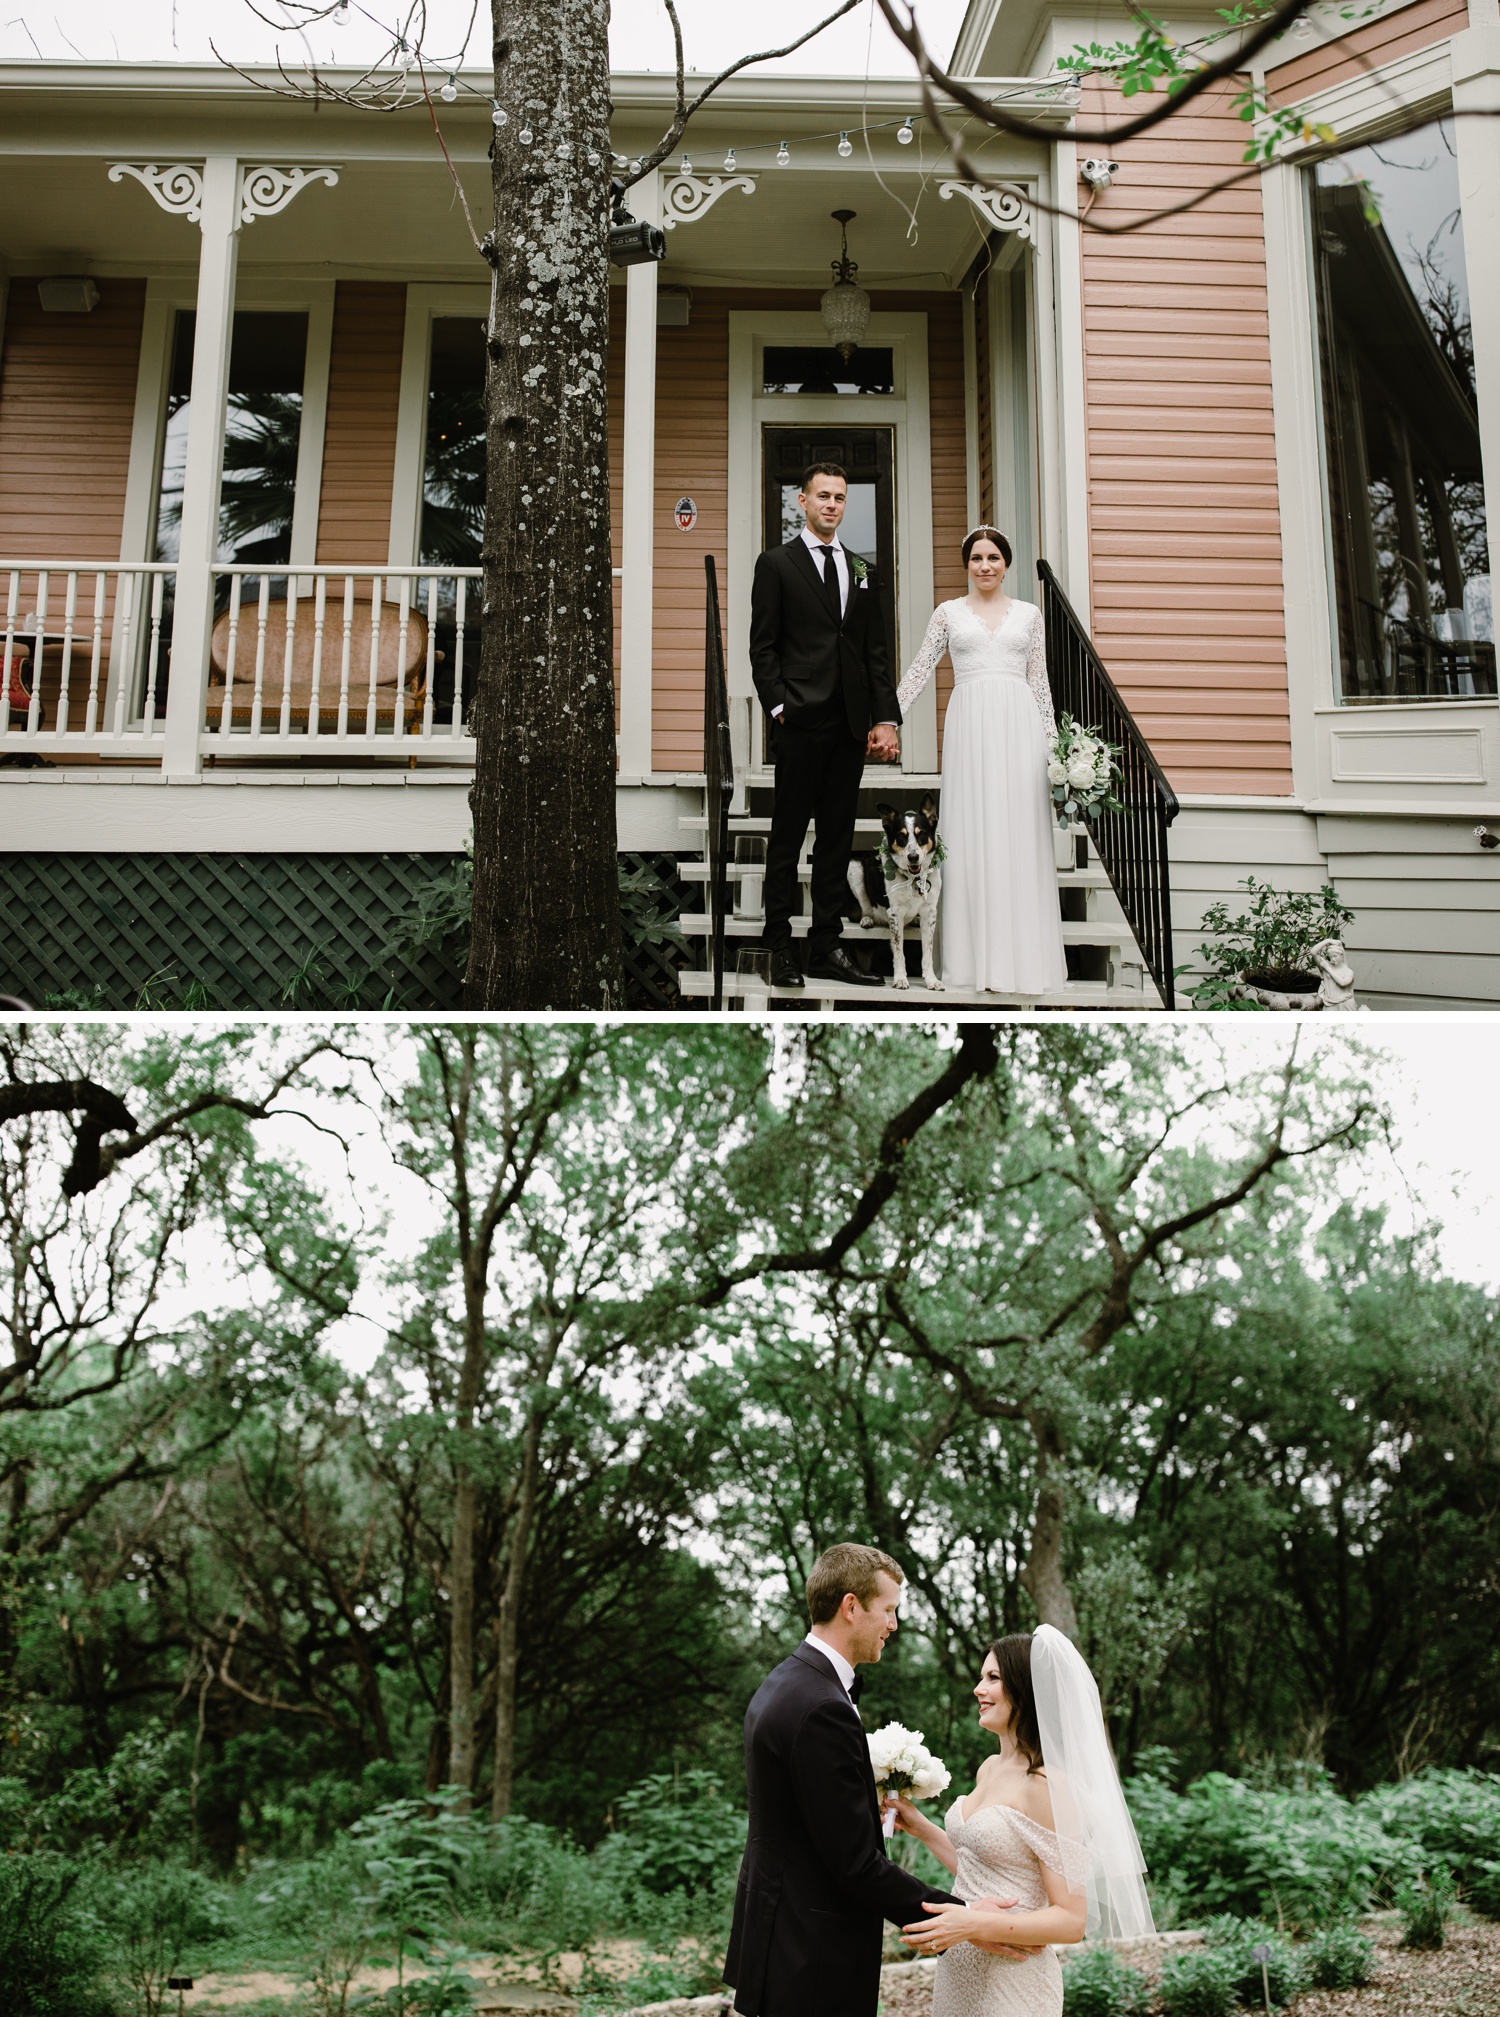 Best Austin Wedding Venues for an Intimate Wedding or Elopement